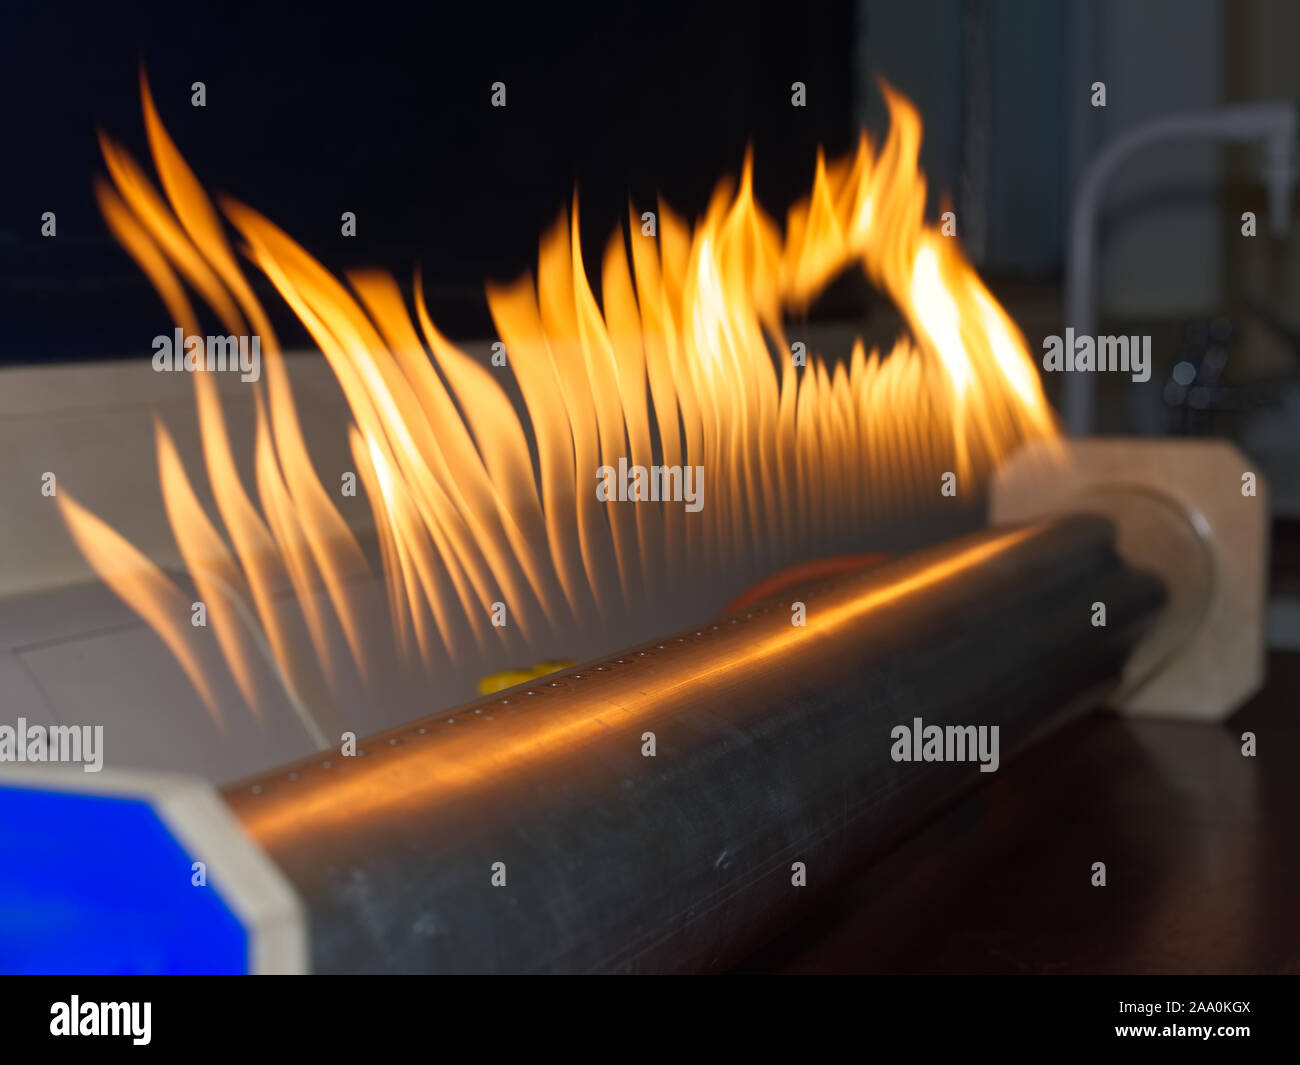 Rubens standing wave flame tube with flames showing resonance in a school science lab. Scientific education concept. Stock Photo